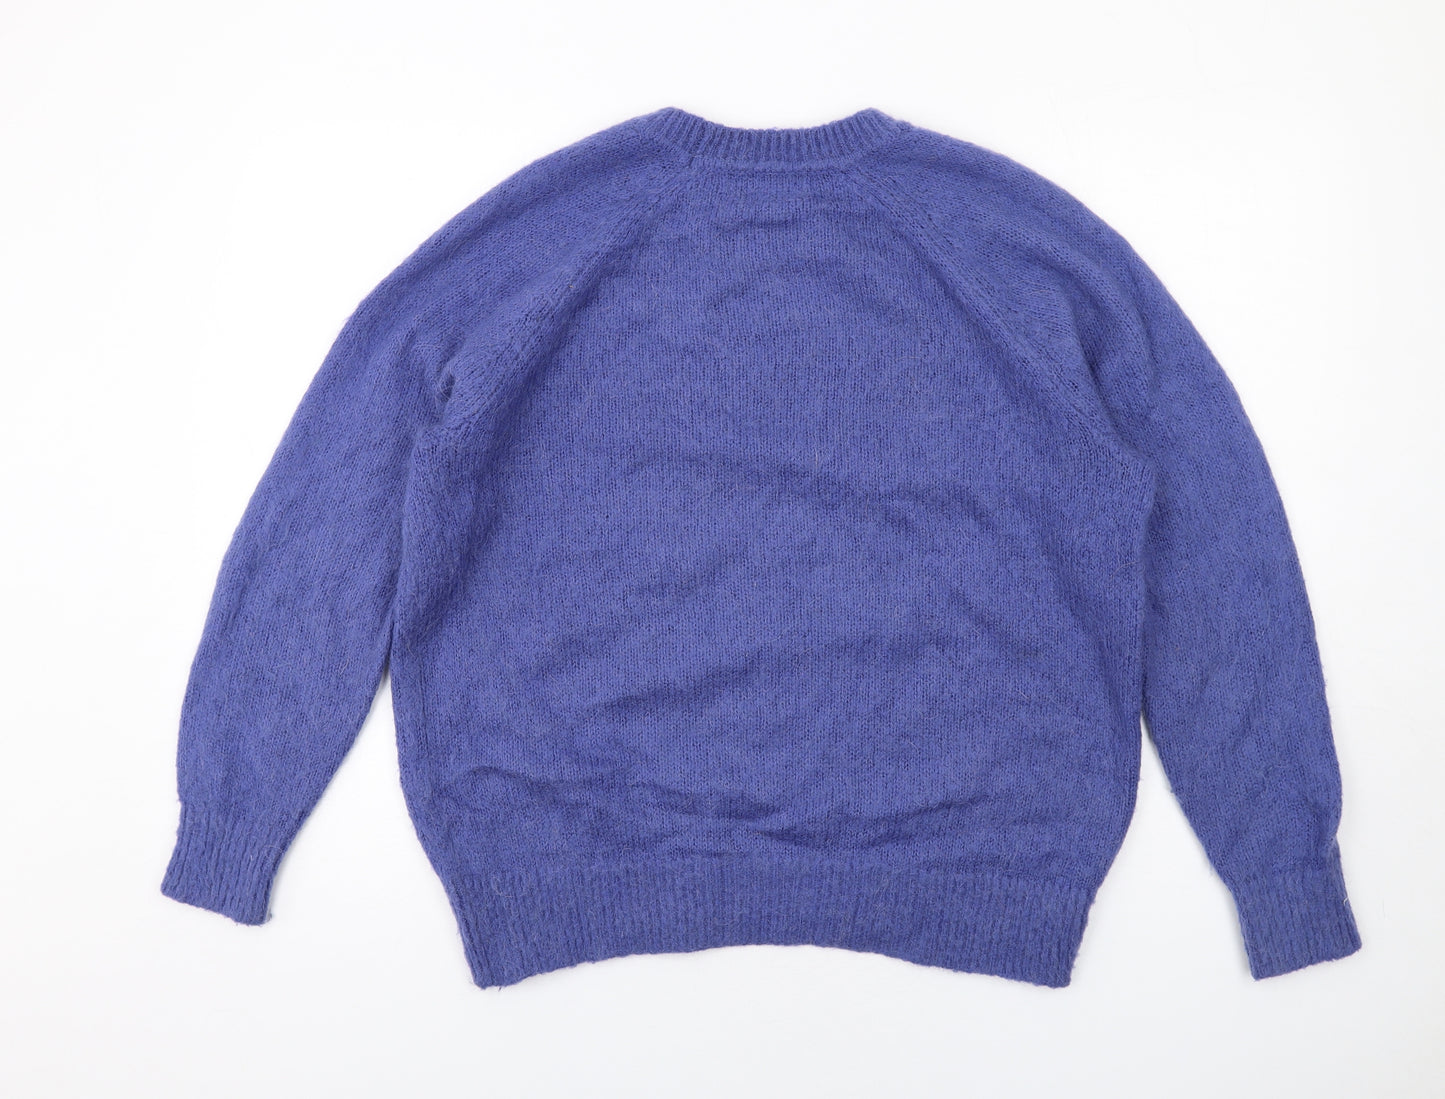 John Lewis Womens Blue Round Neck Acrylic Pullover Jumper Size 12